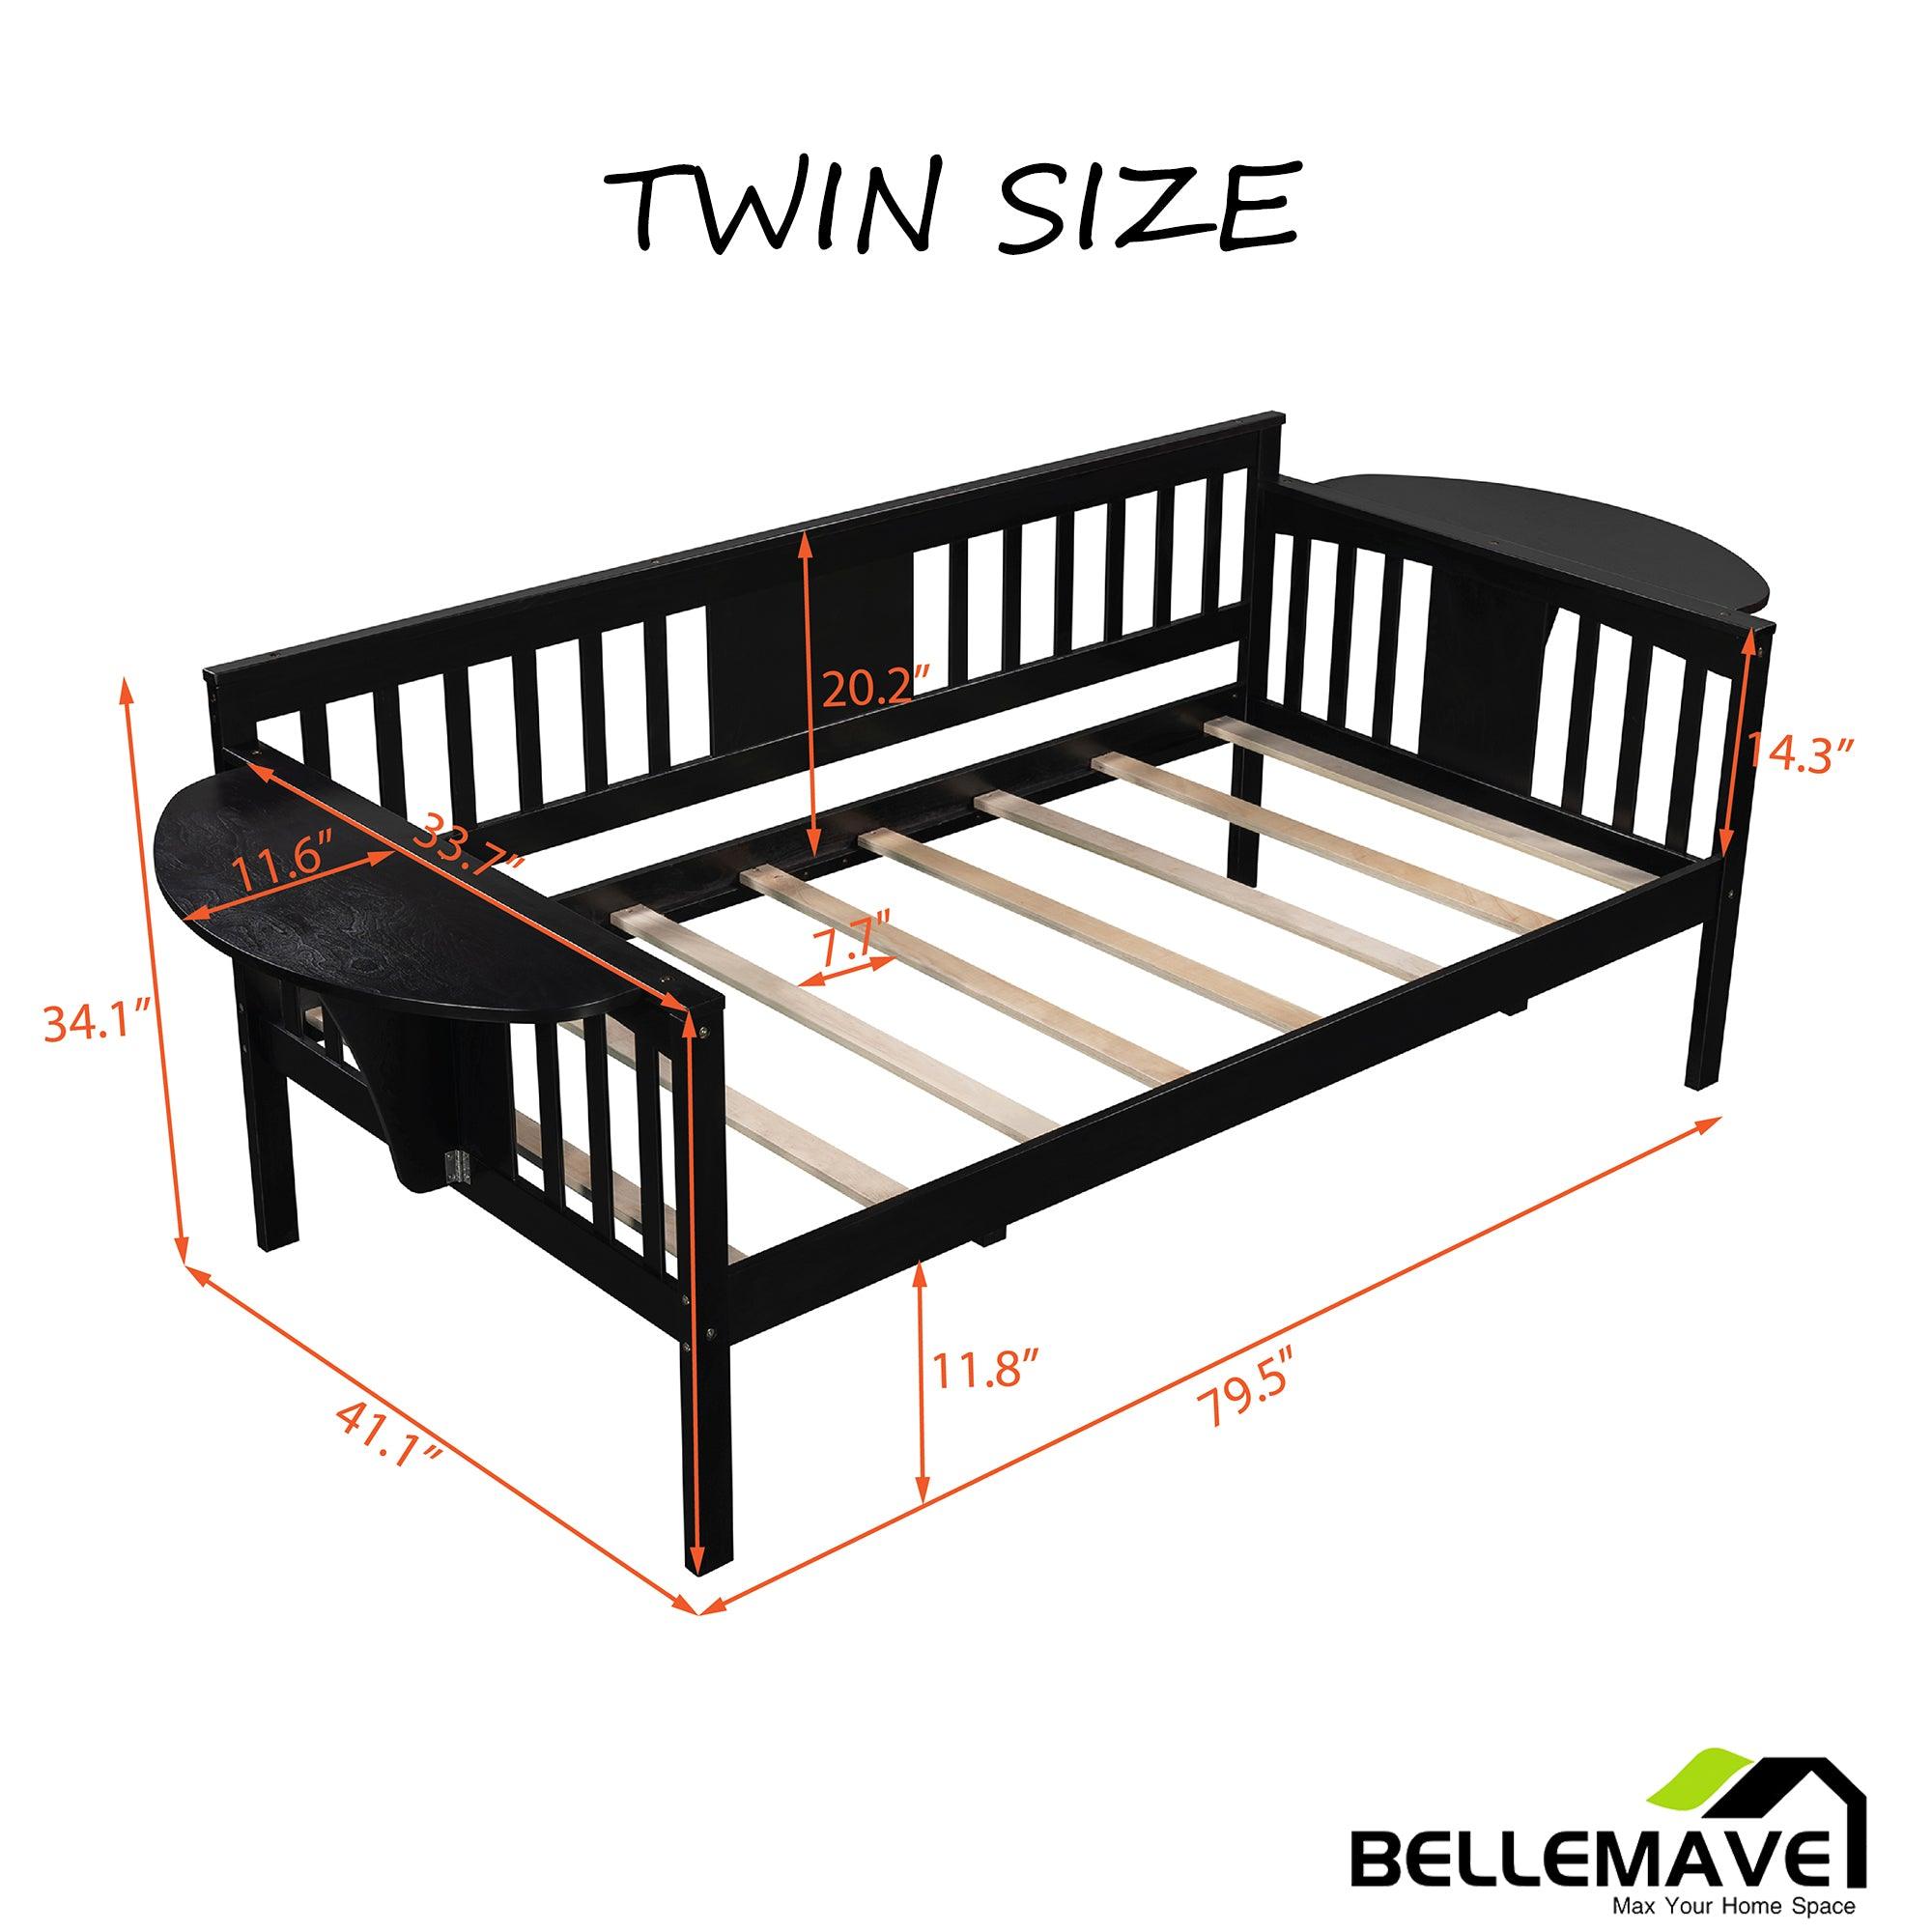 Bellemave Daybed Frame with small foldable table - Bellemave